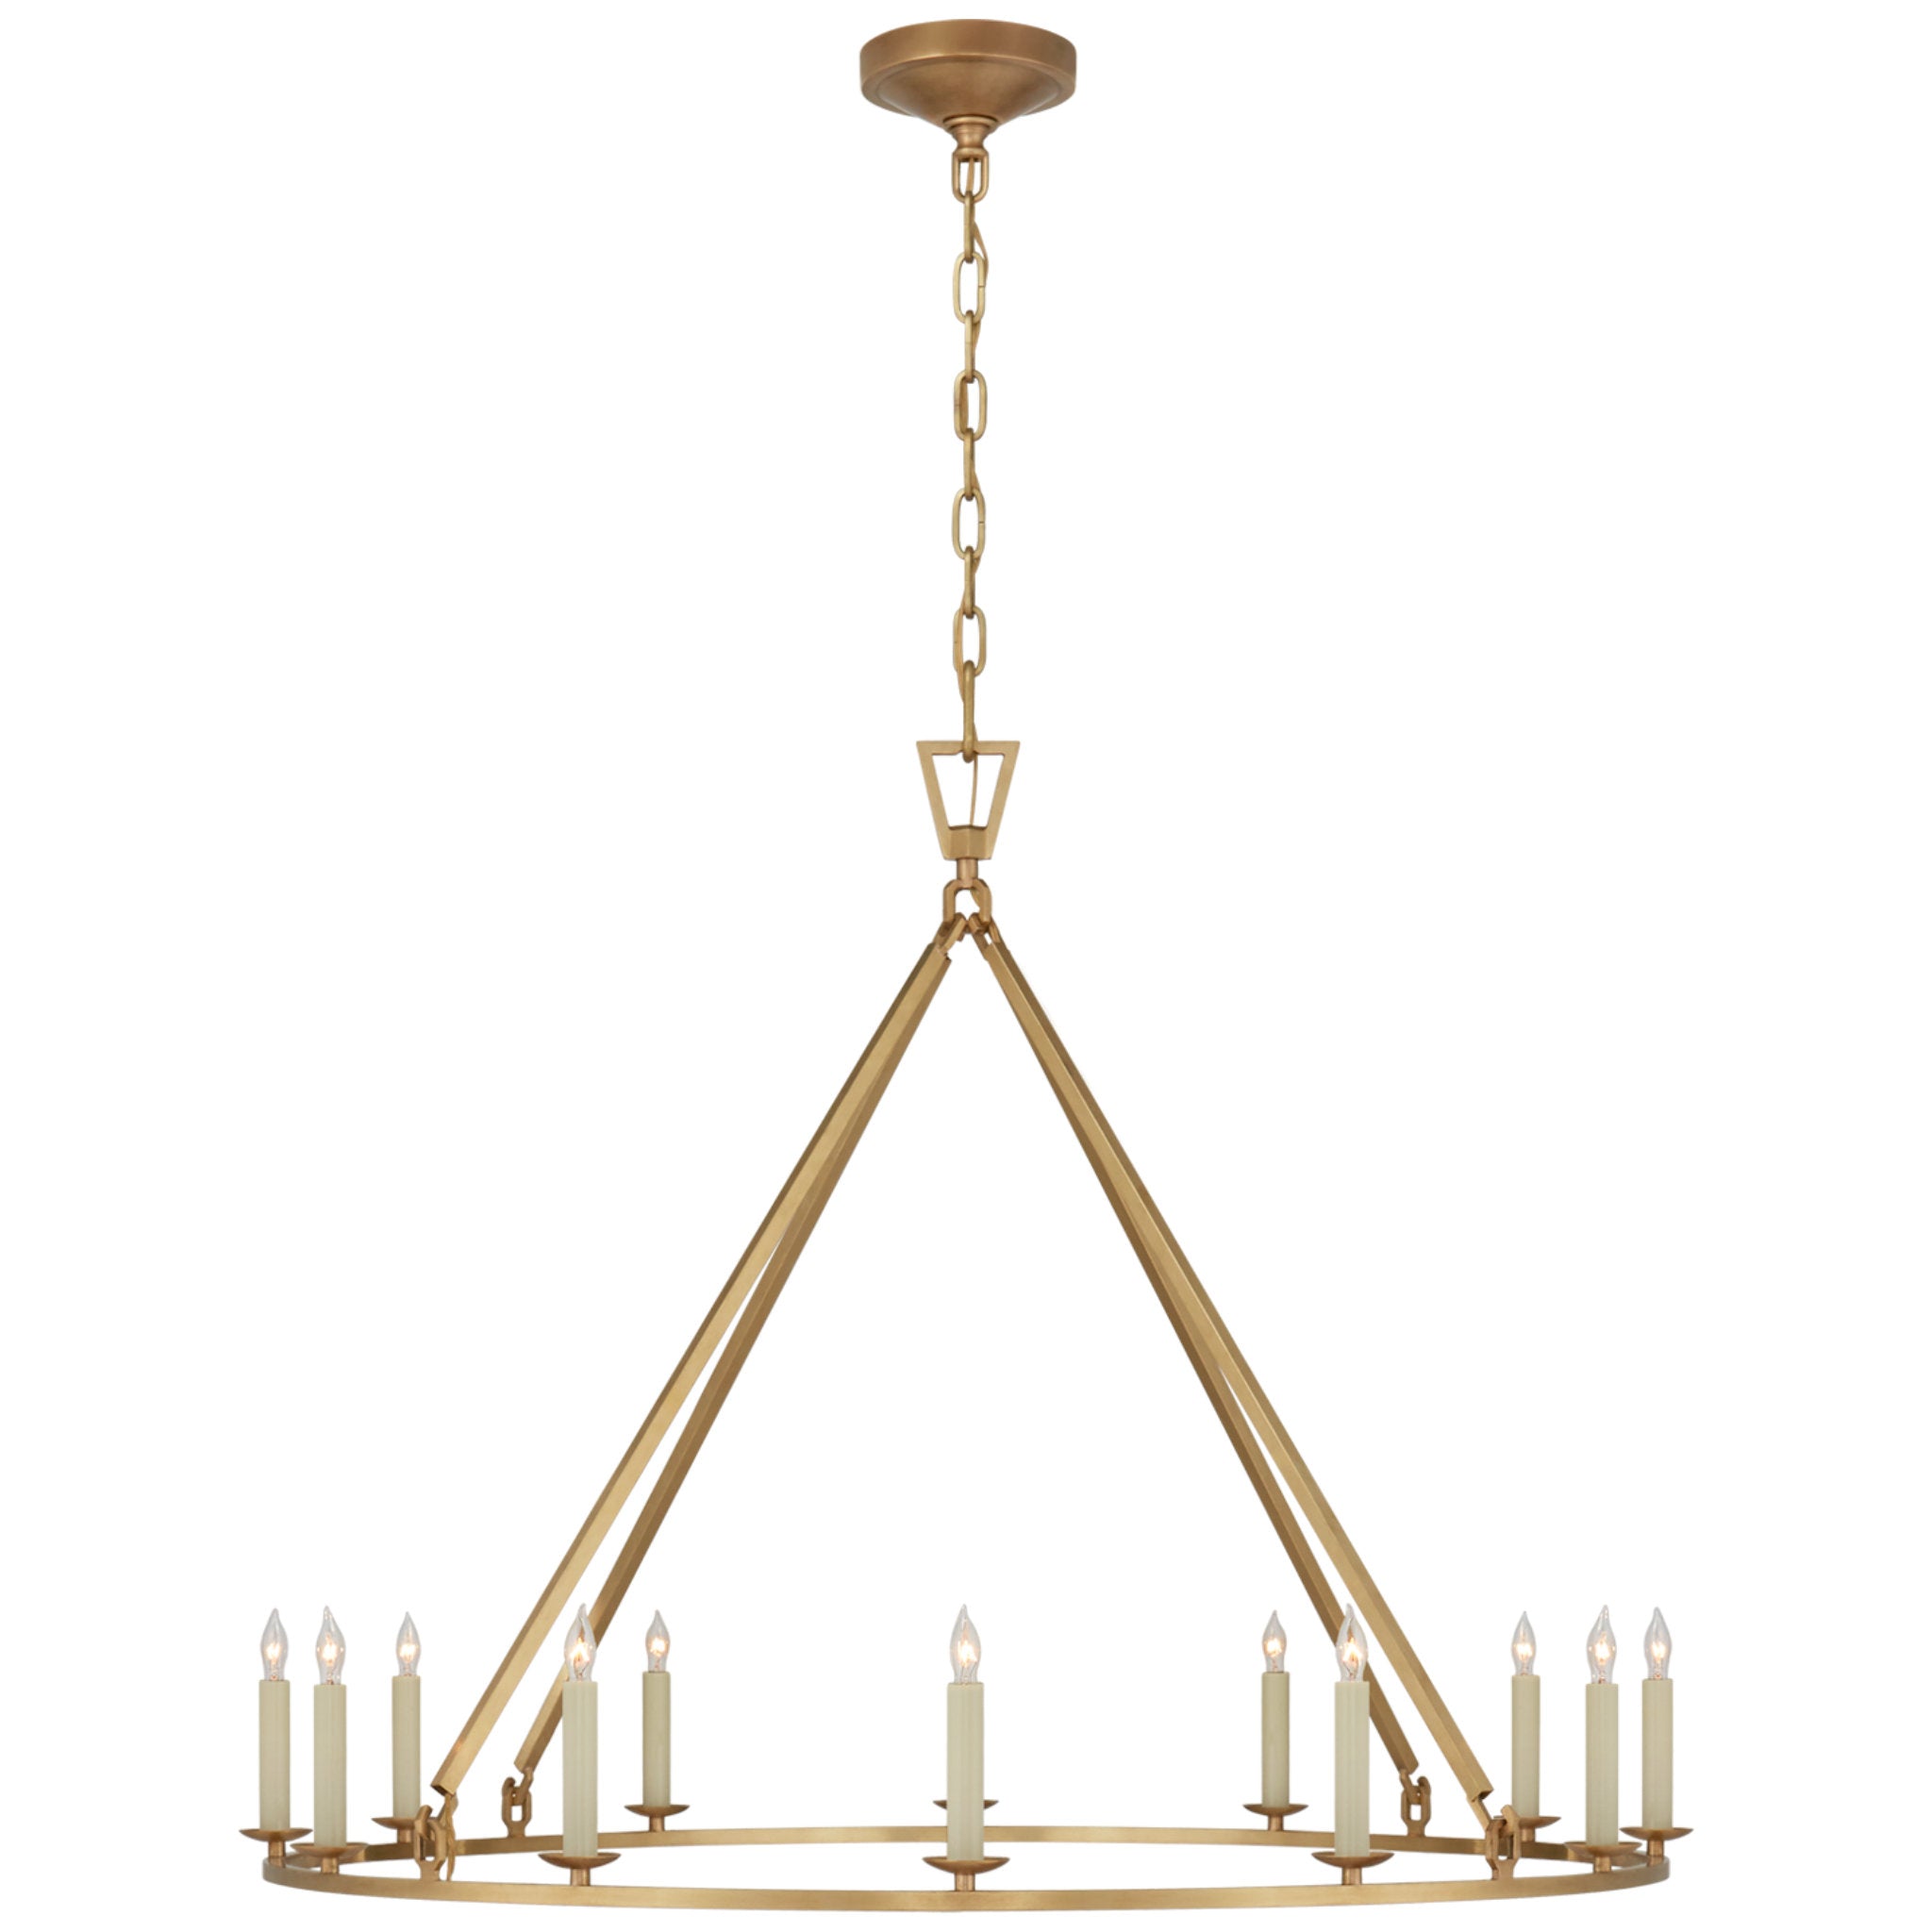 Chapman & Myers Darlana Large Single Ring Chandelier in Antique-Burnished Brass